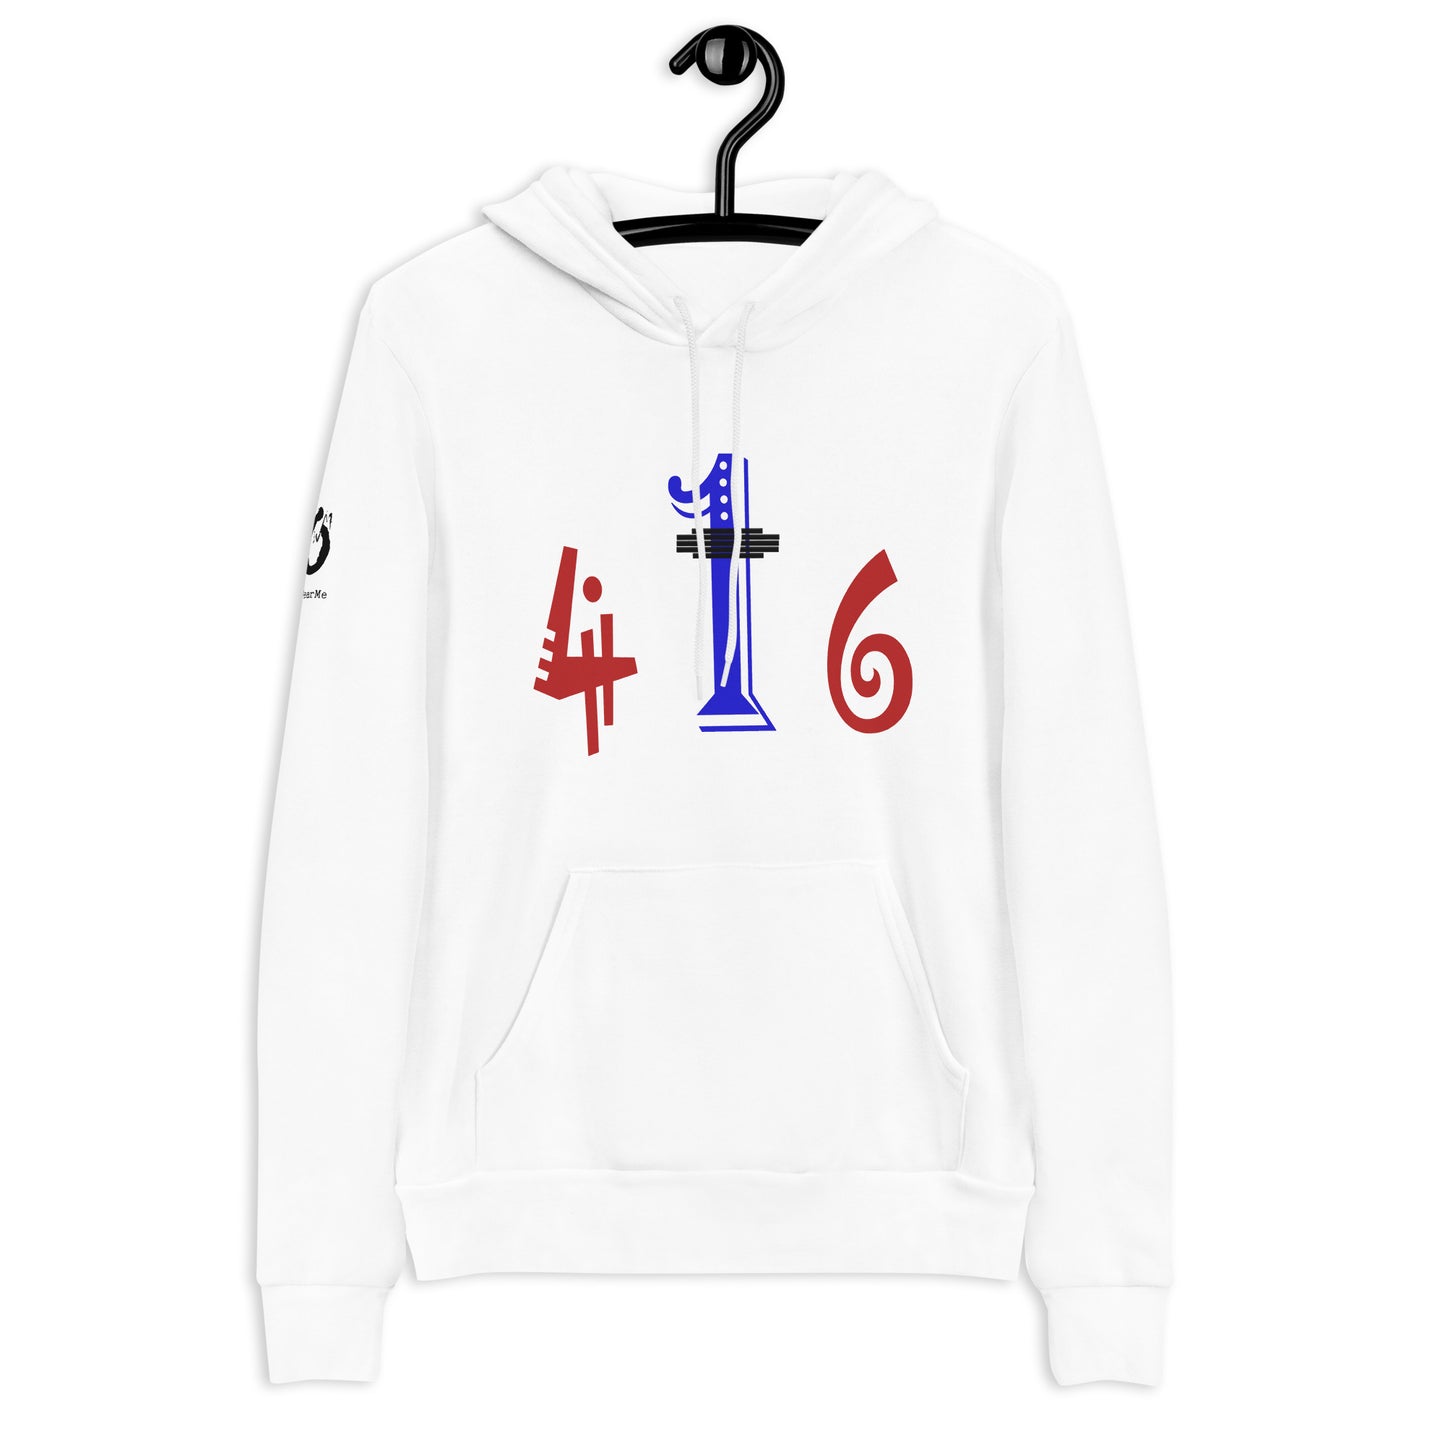 Four One SIX - soft and comfy unisex hoodie v2